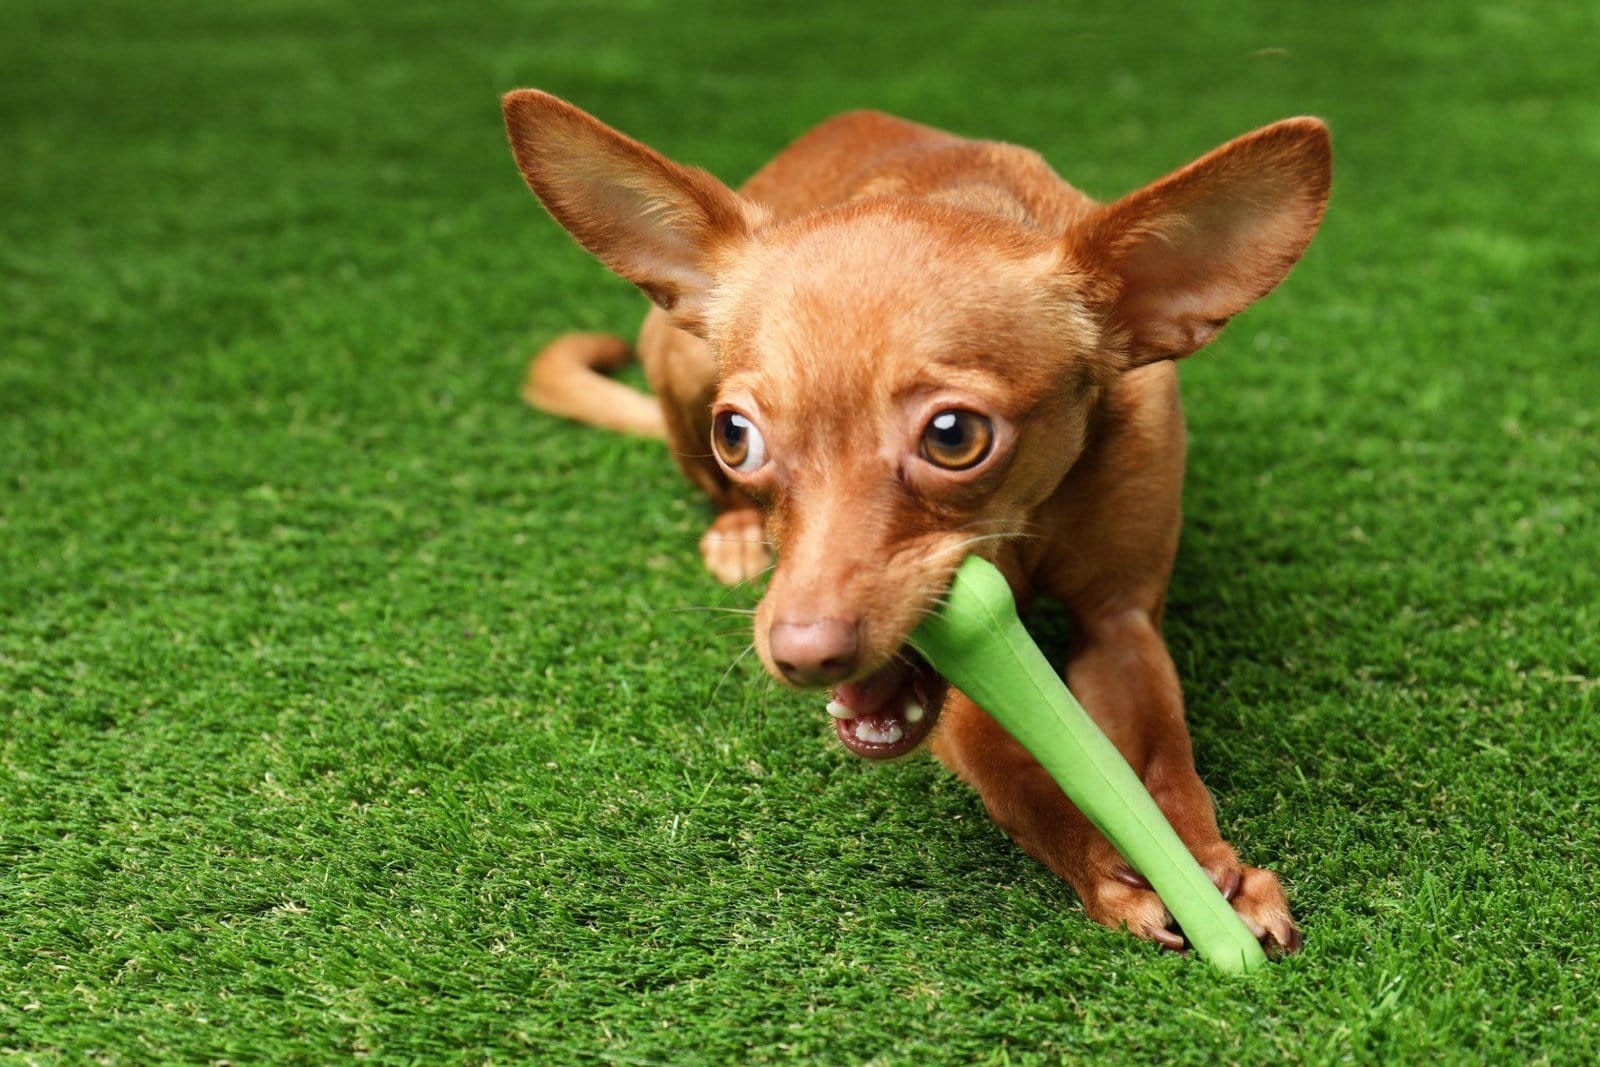 A small brown dog with large ears is playfully chewing on a green toy bone while lying on a lush green lawn, expertly laid by reliable pet turf installers in Scottsdale AZ. The dog's eyes are wide open, and it appears excited and energetic against the vibrant backdrop of Scottsdale artificial turf.